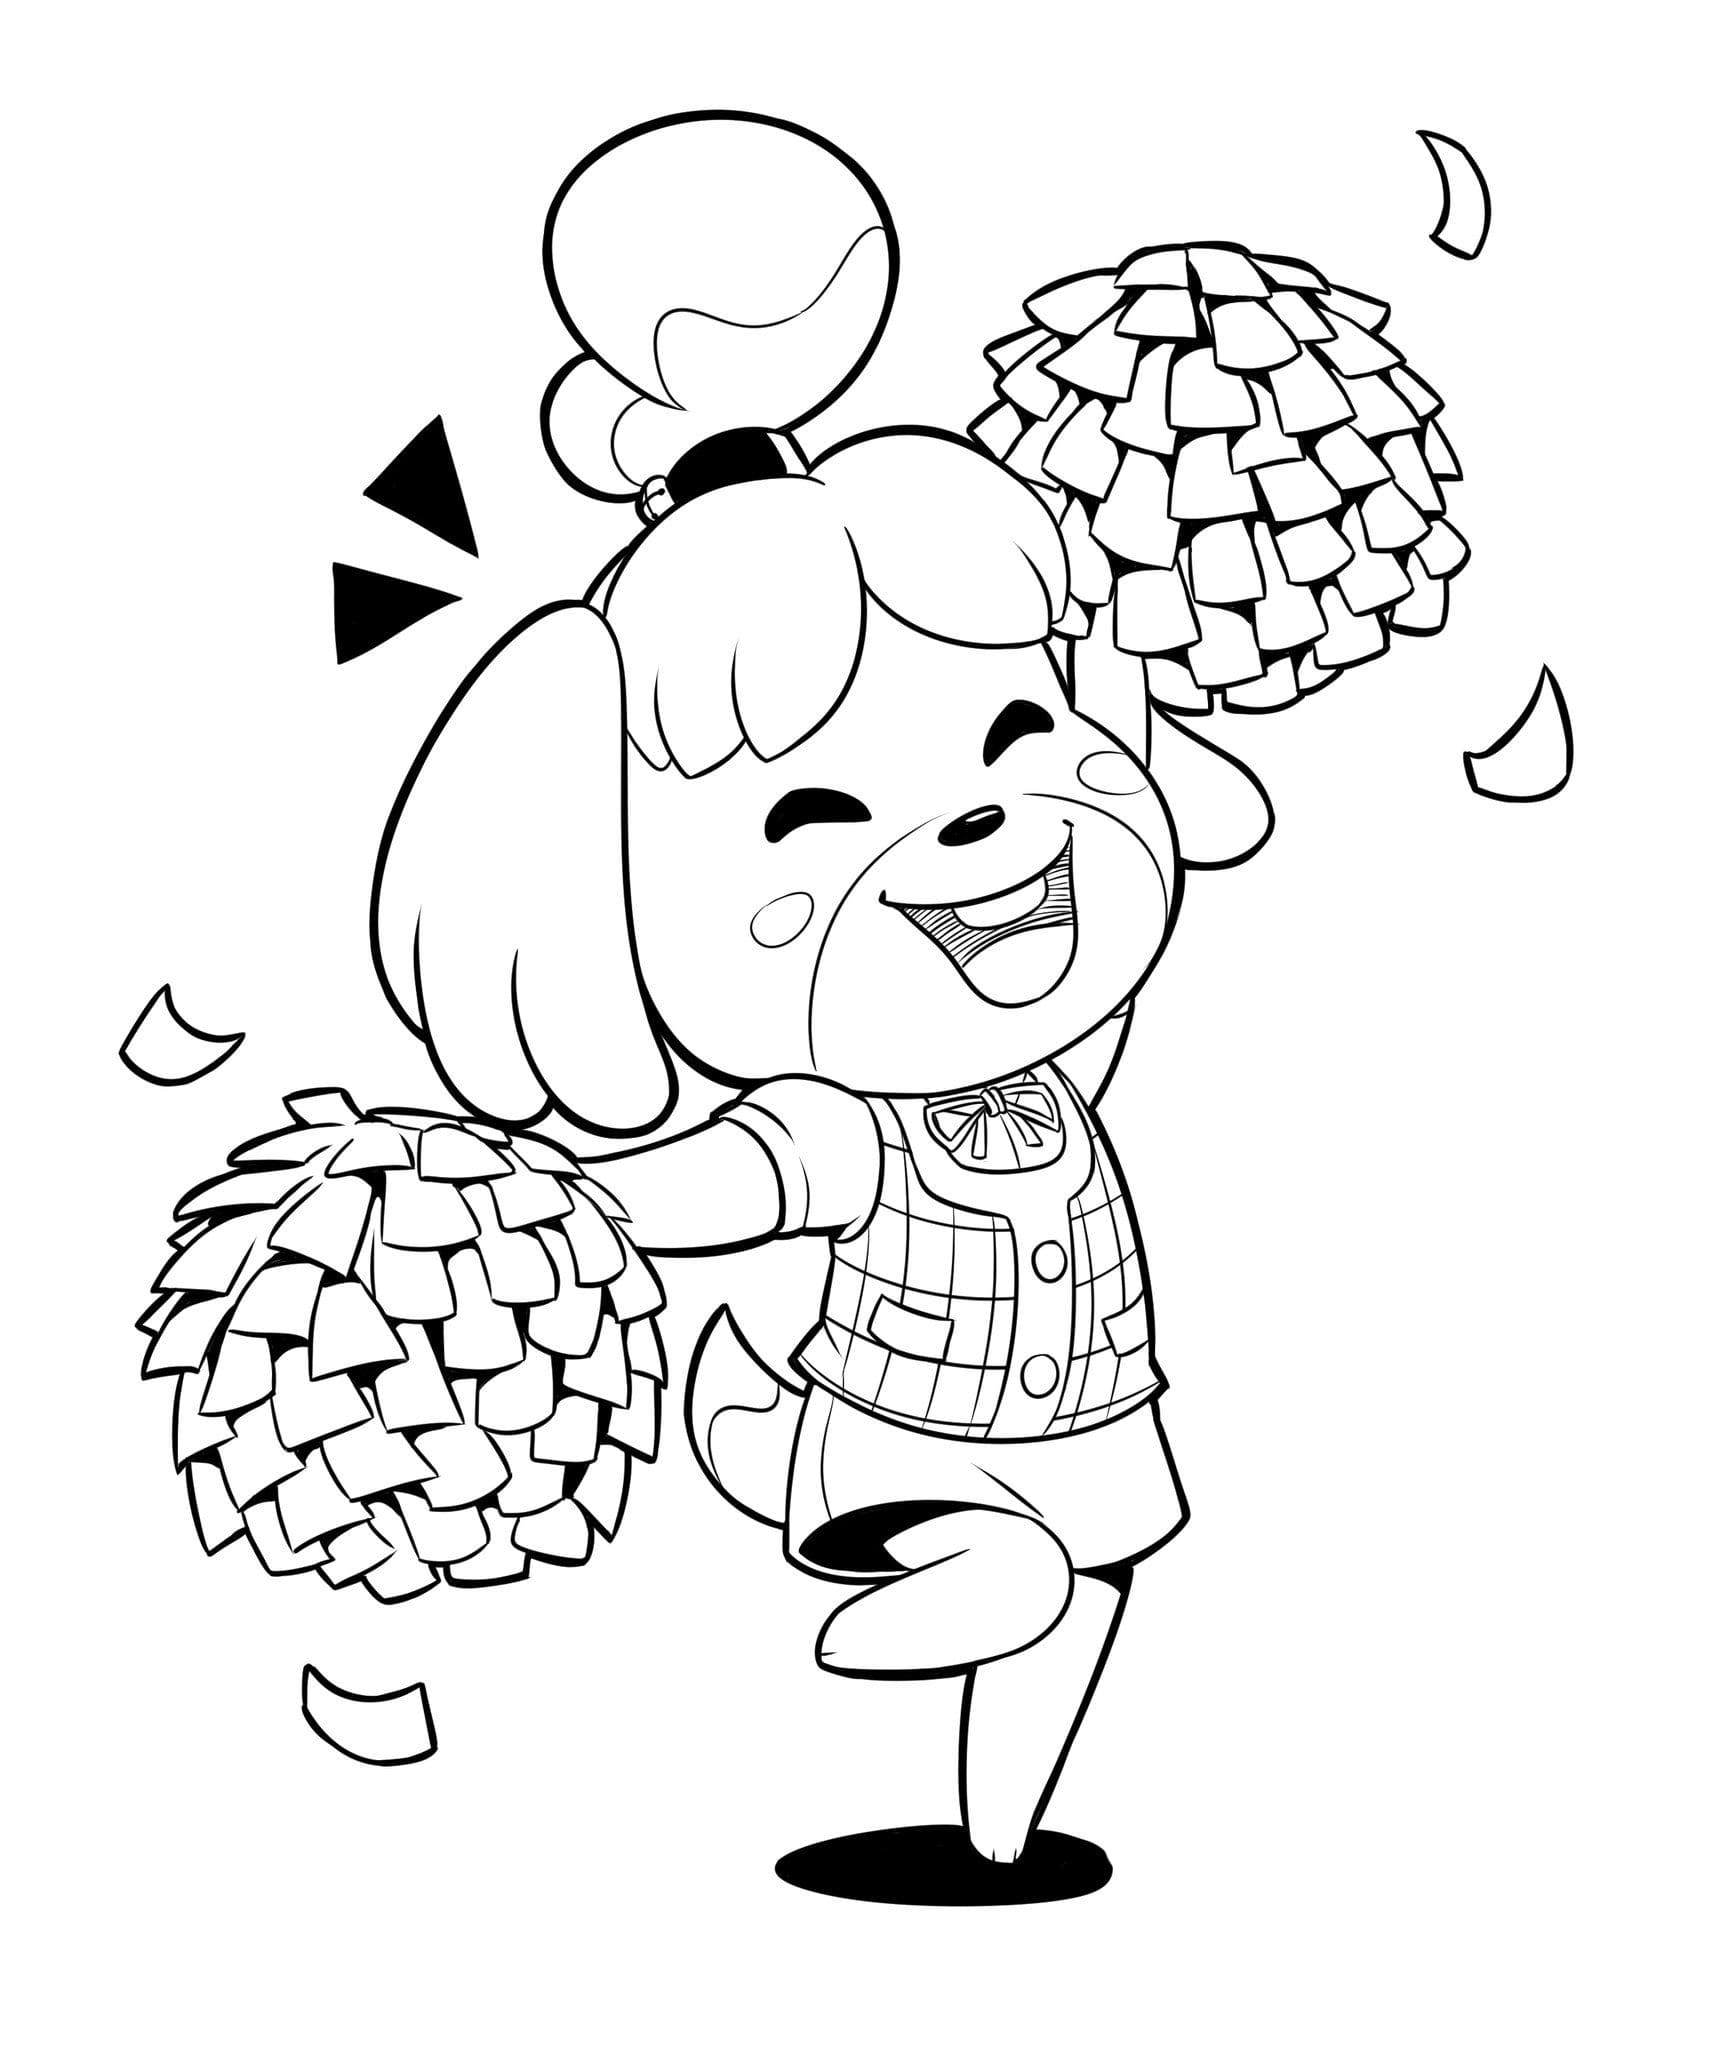 Download Animal Crossing Coloring Pages. 90 Printable Coloring Pages